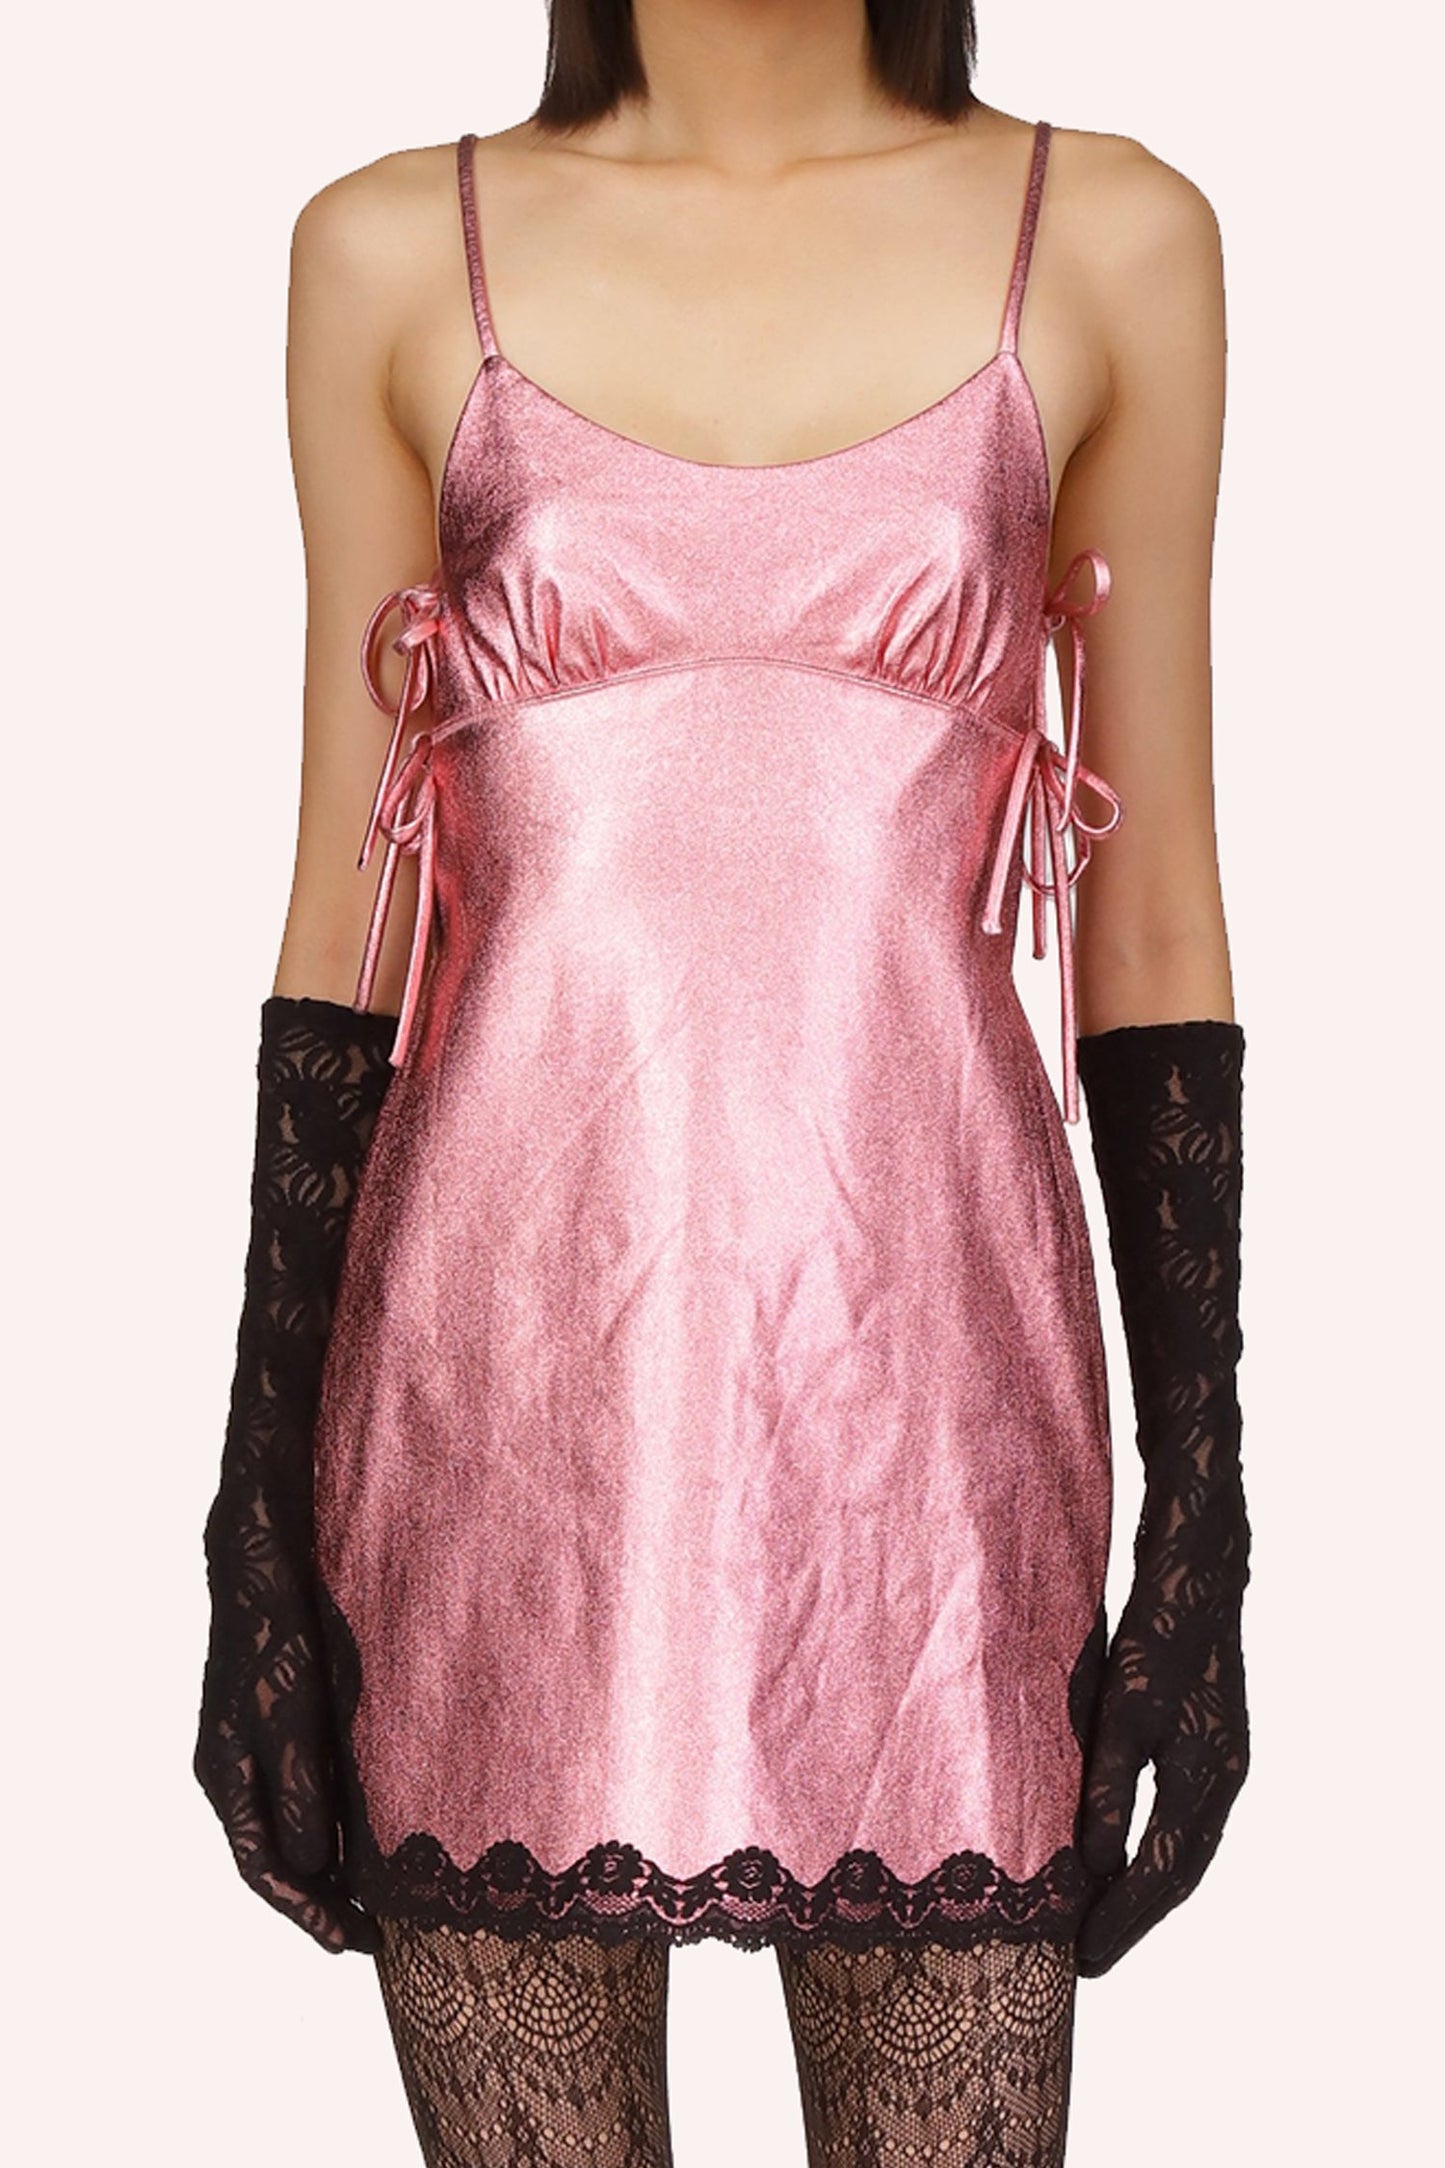 Floral Stretch Lace Gloves paired with Metallic Faux Leather Mini Dress Bubblegum